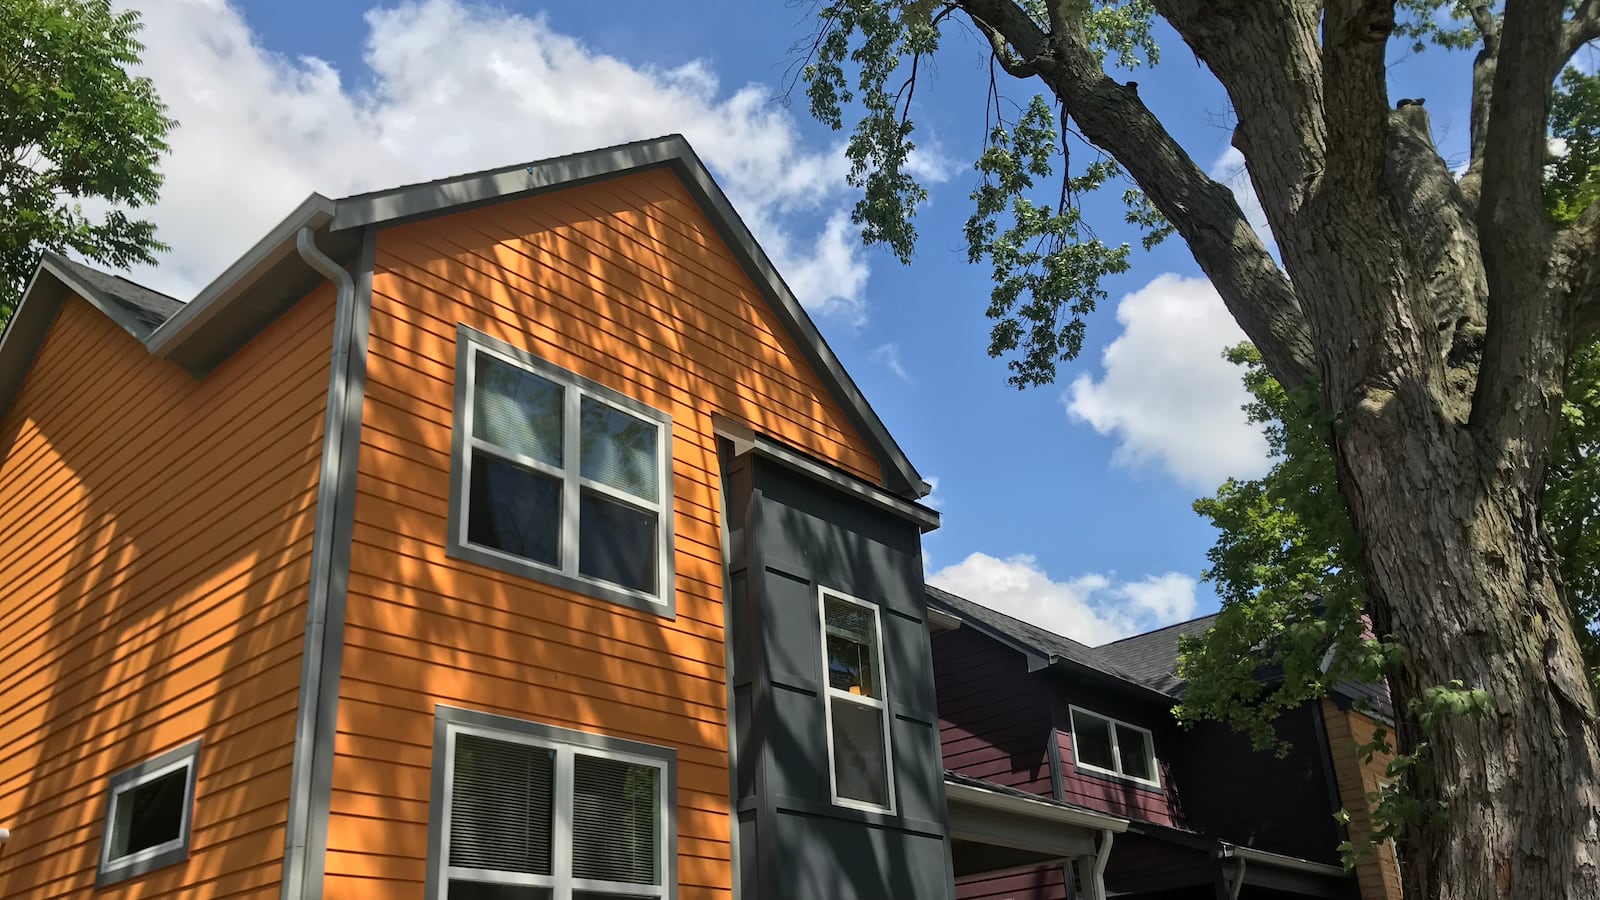 The Educators' Village is a two-block cluster of 22 new and restored bold-colored homes in the St. Clair Place neighborhood. Though marketed to teachers, the homes are set at below-market prices for anyone within a low- to middle-income cap.